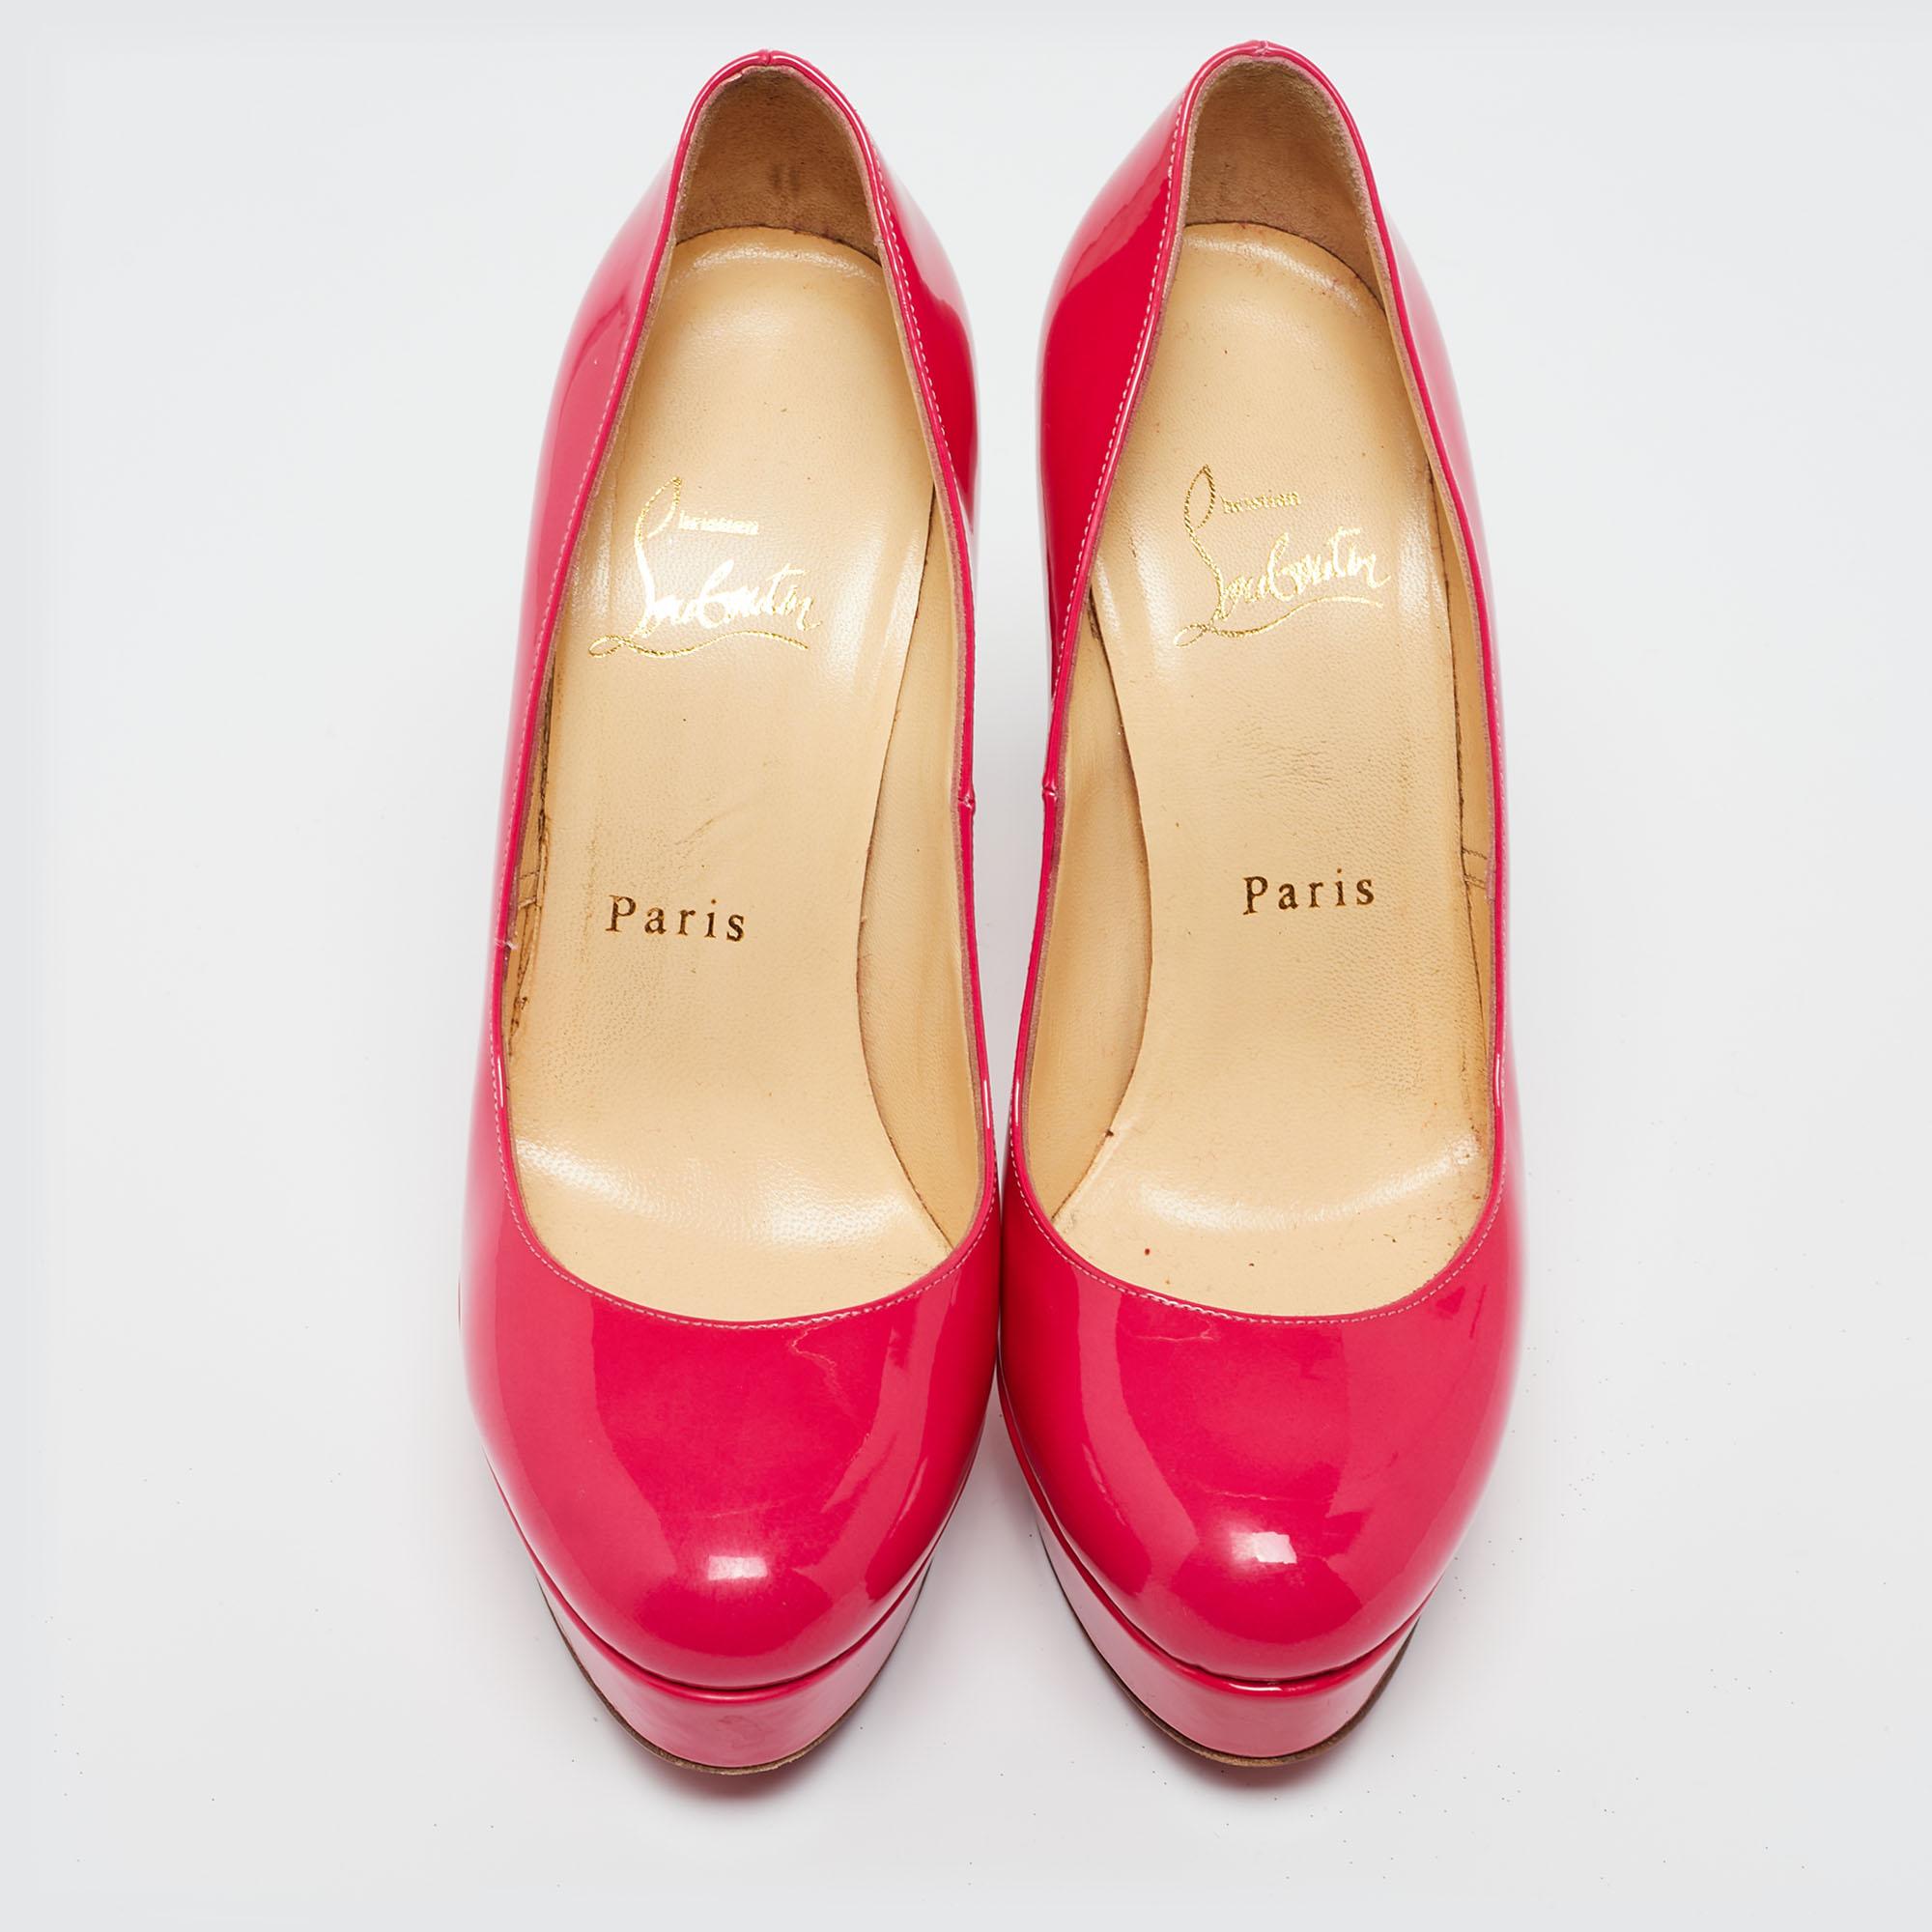 A classic to add to one's shoe collection is this pair. These Christian Louboutin beauties are covered in patent leather and styled with platforms, 12.5 cm heels, and signature red soles. Add these neon pink CL pumps to your closet today!

Includes: